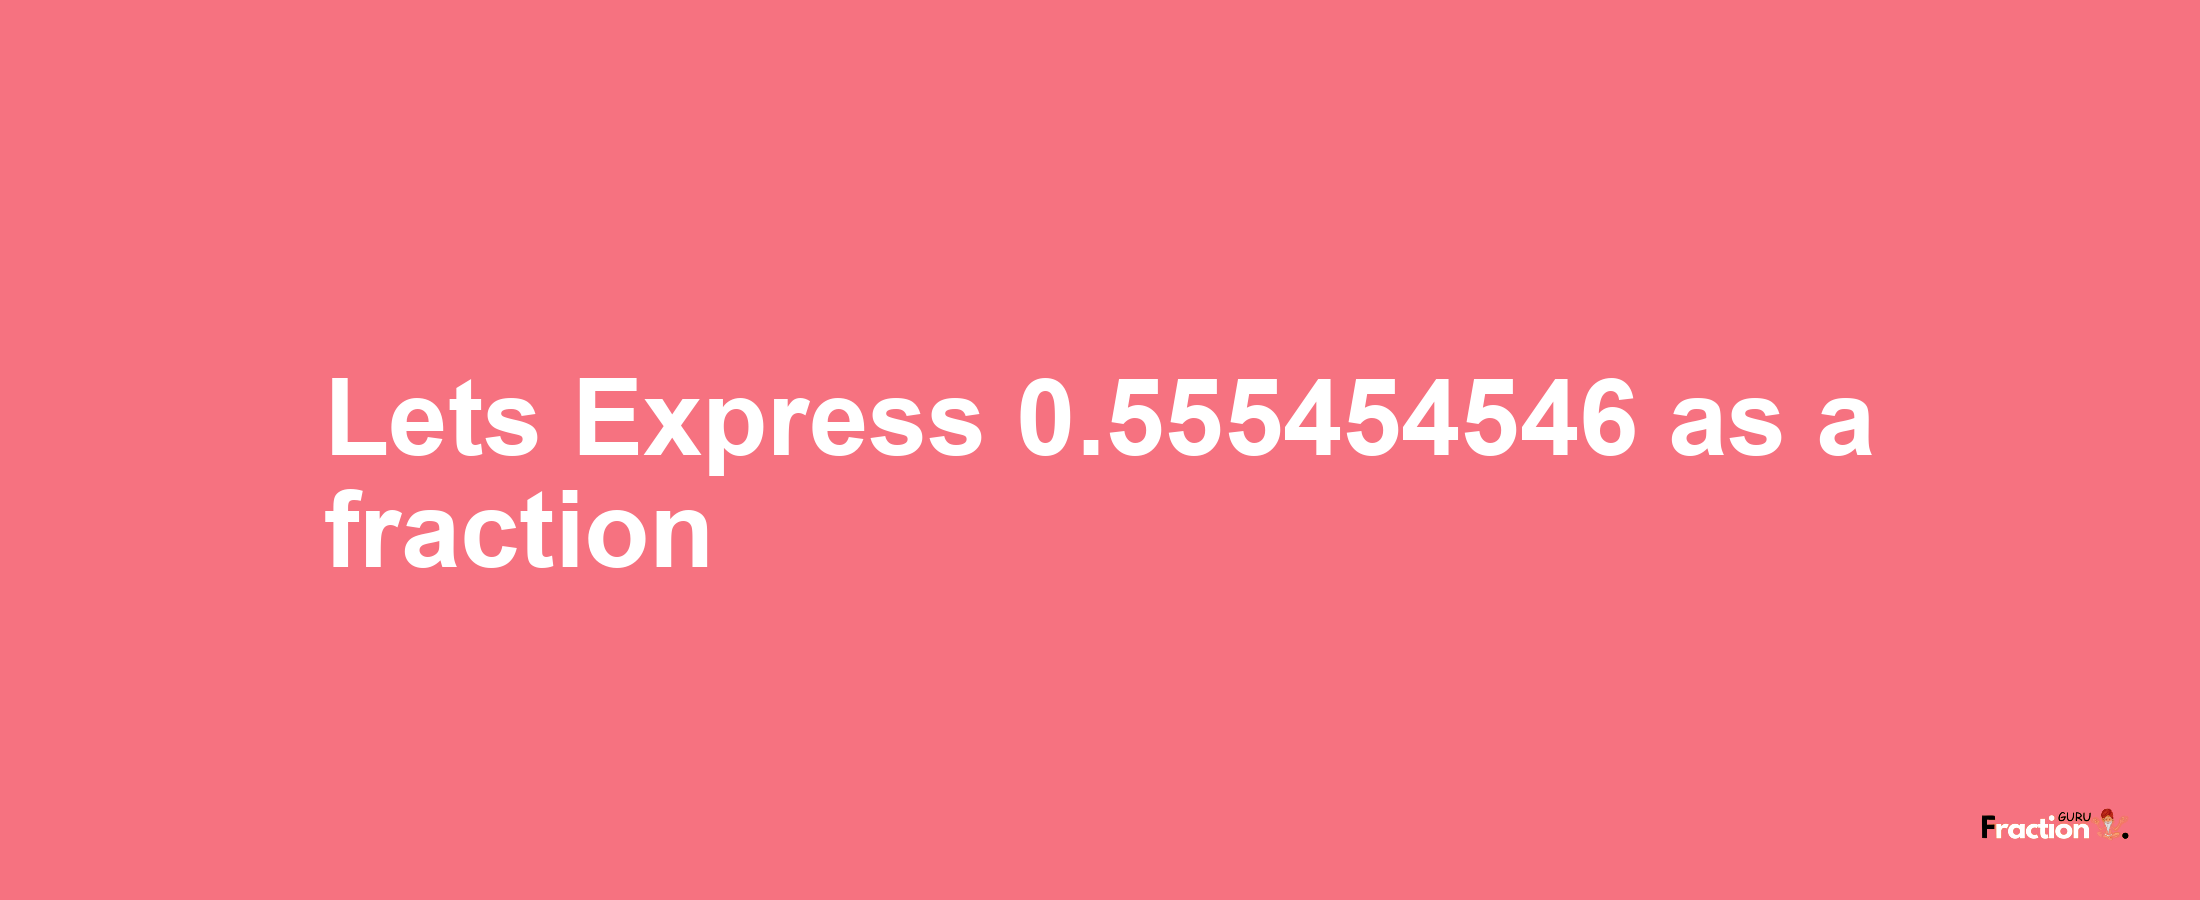 Lets Express 0.555454546 as afraction